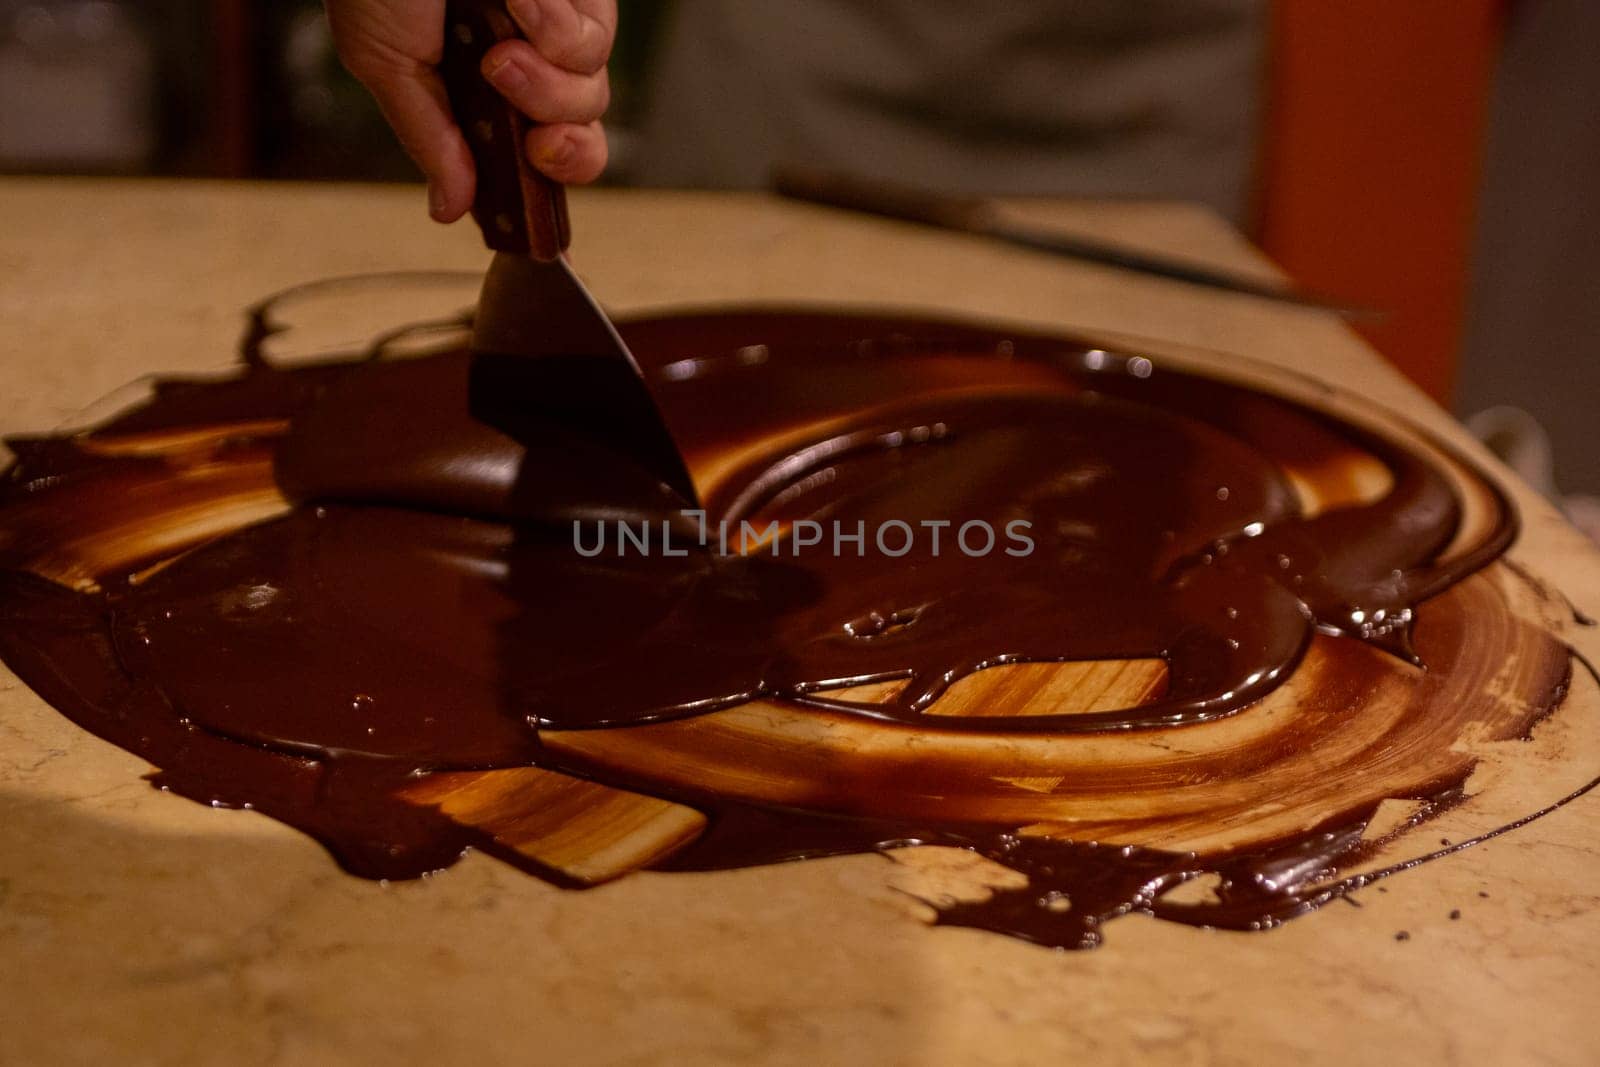 Chocolatier spreading chocolate as a demonstration